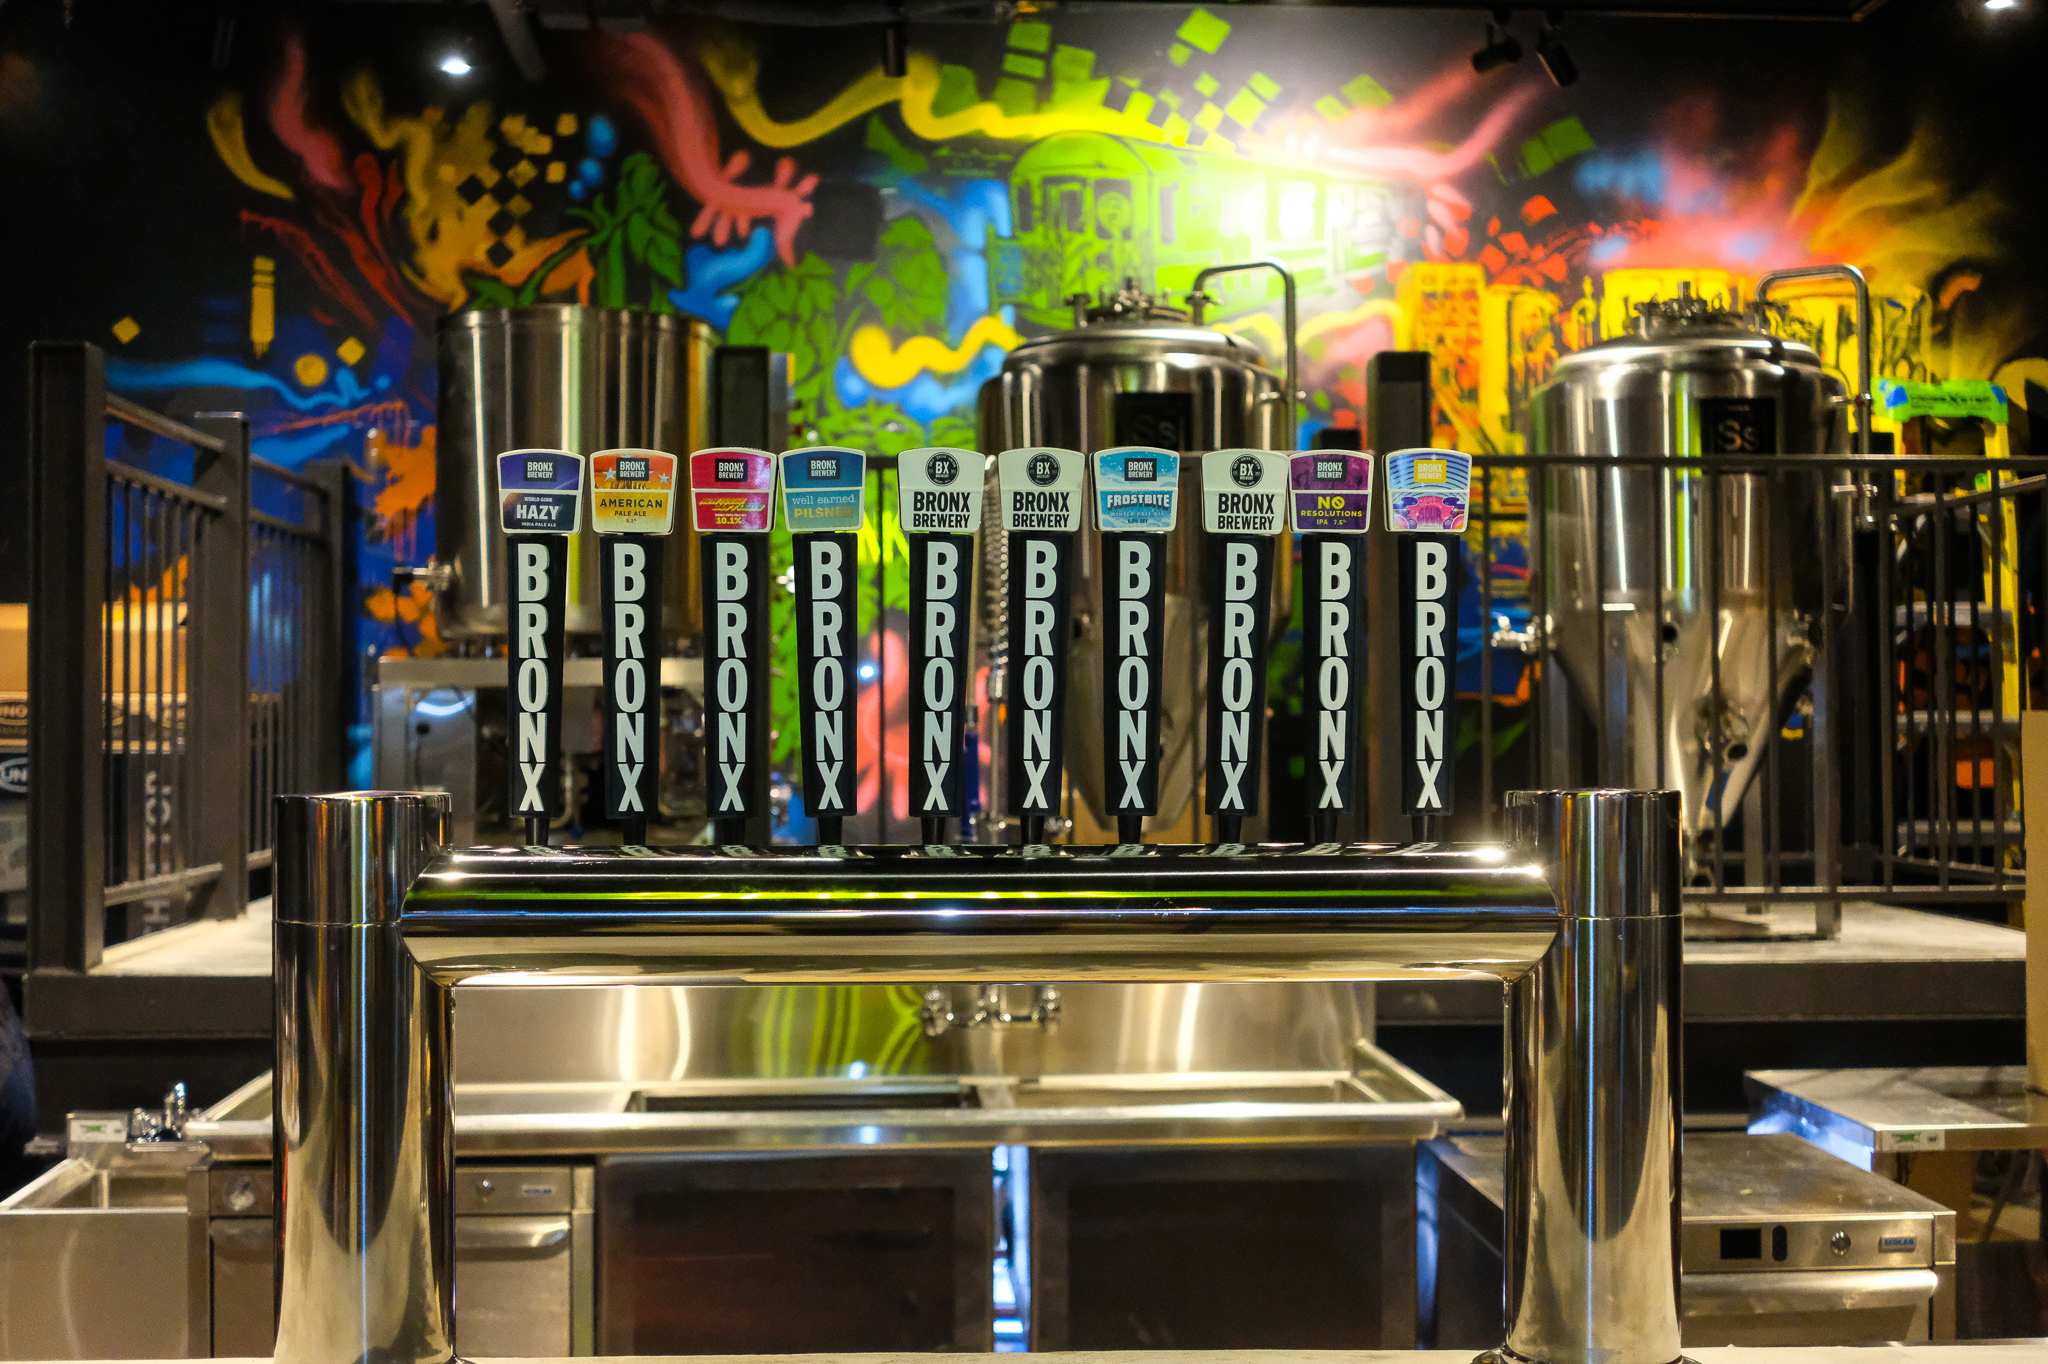 The Bronx Brewery taps with a colorful mural in the background